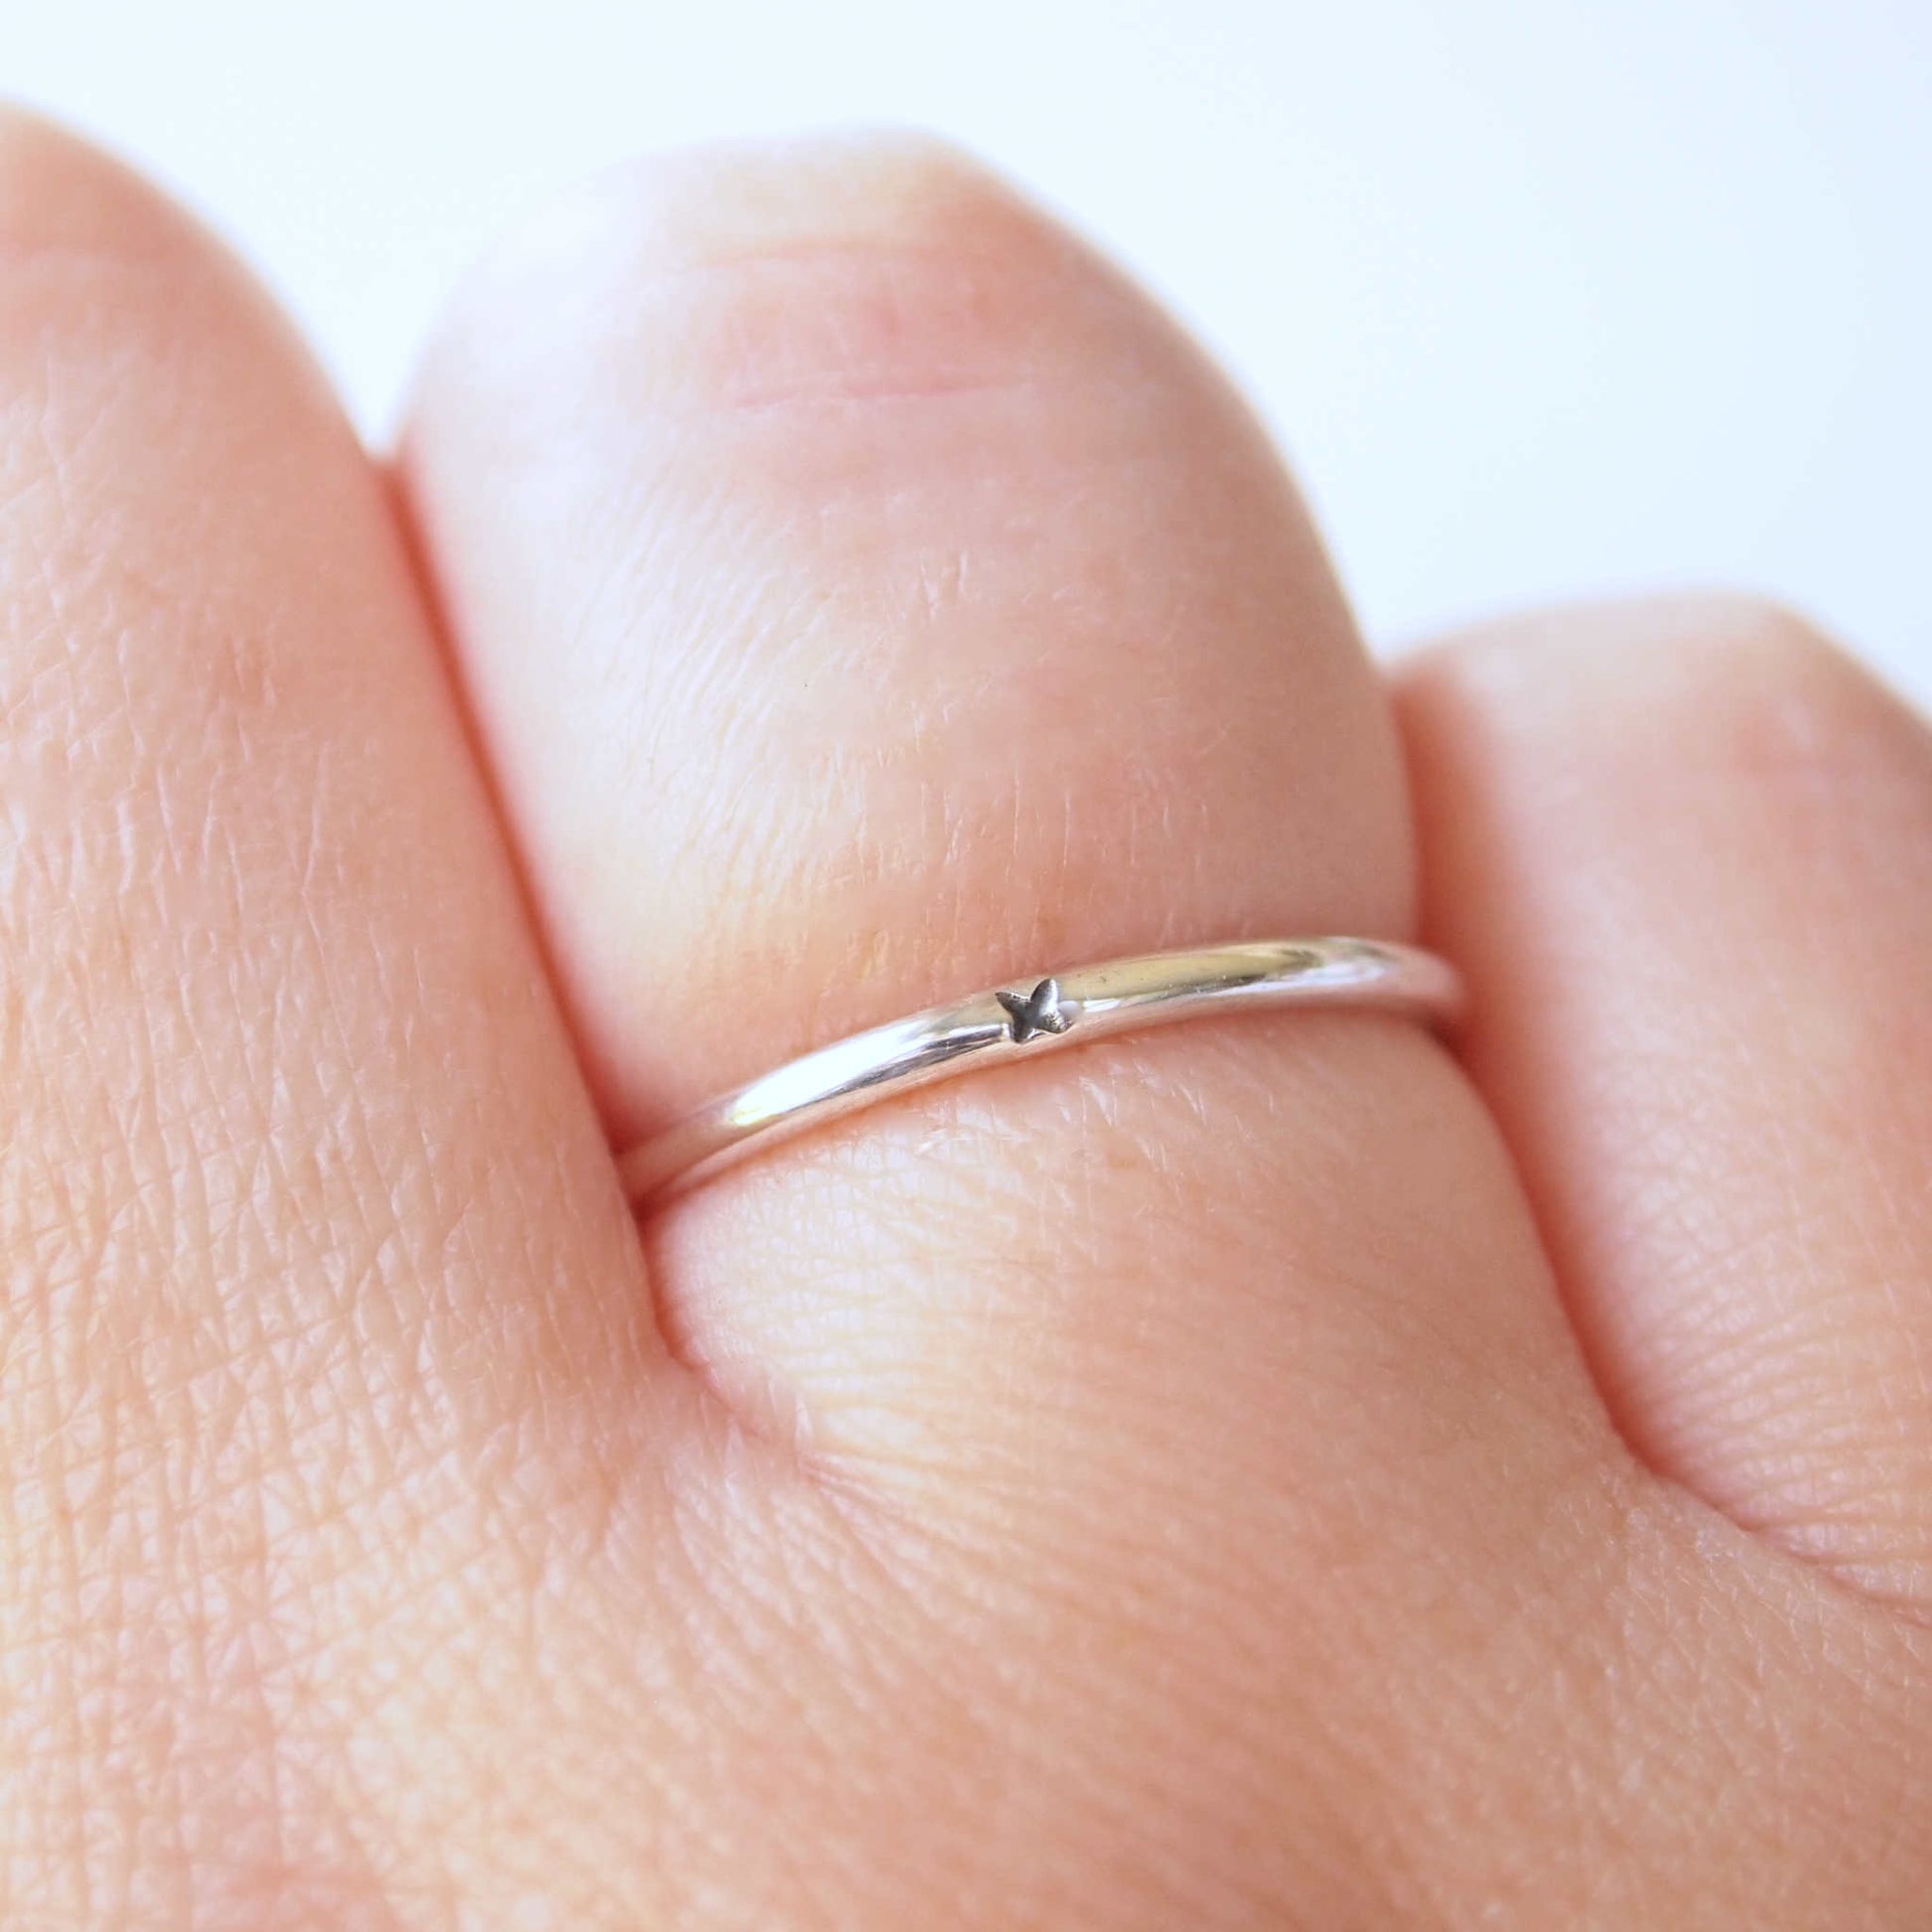 Plain silver round wedding band with an x stamped in black. Sterling Silver simple style promise ring that's also a sentimental ring for partner or child. Handmade in Scotland by maram jewellery